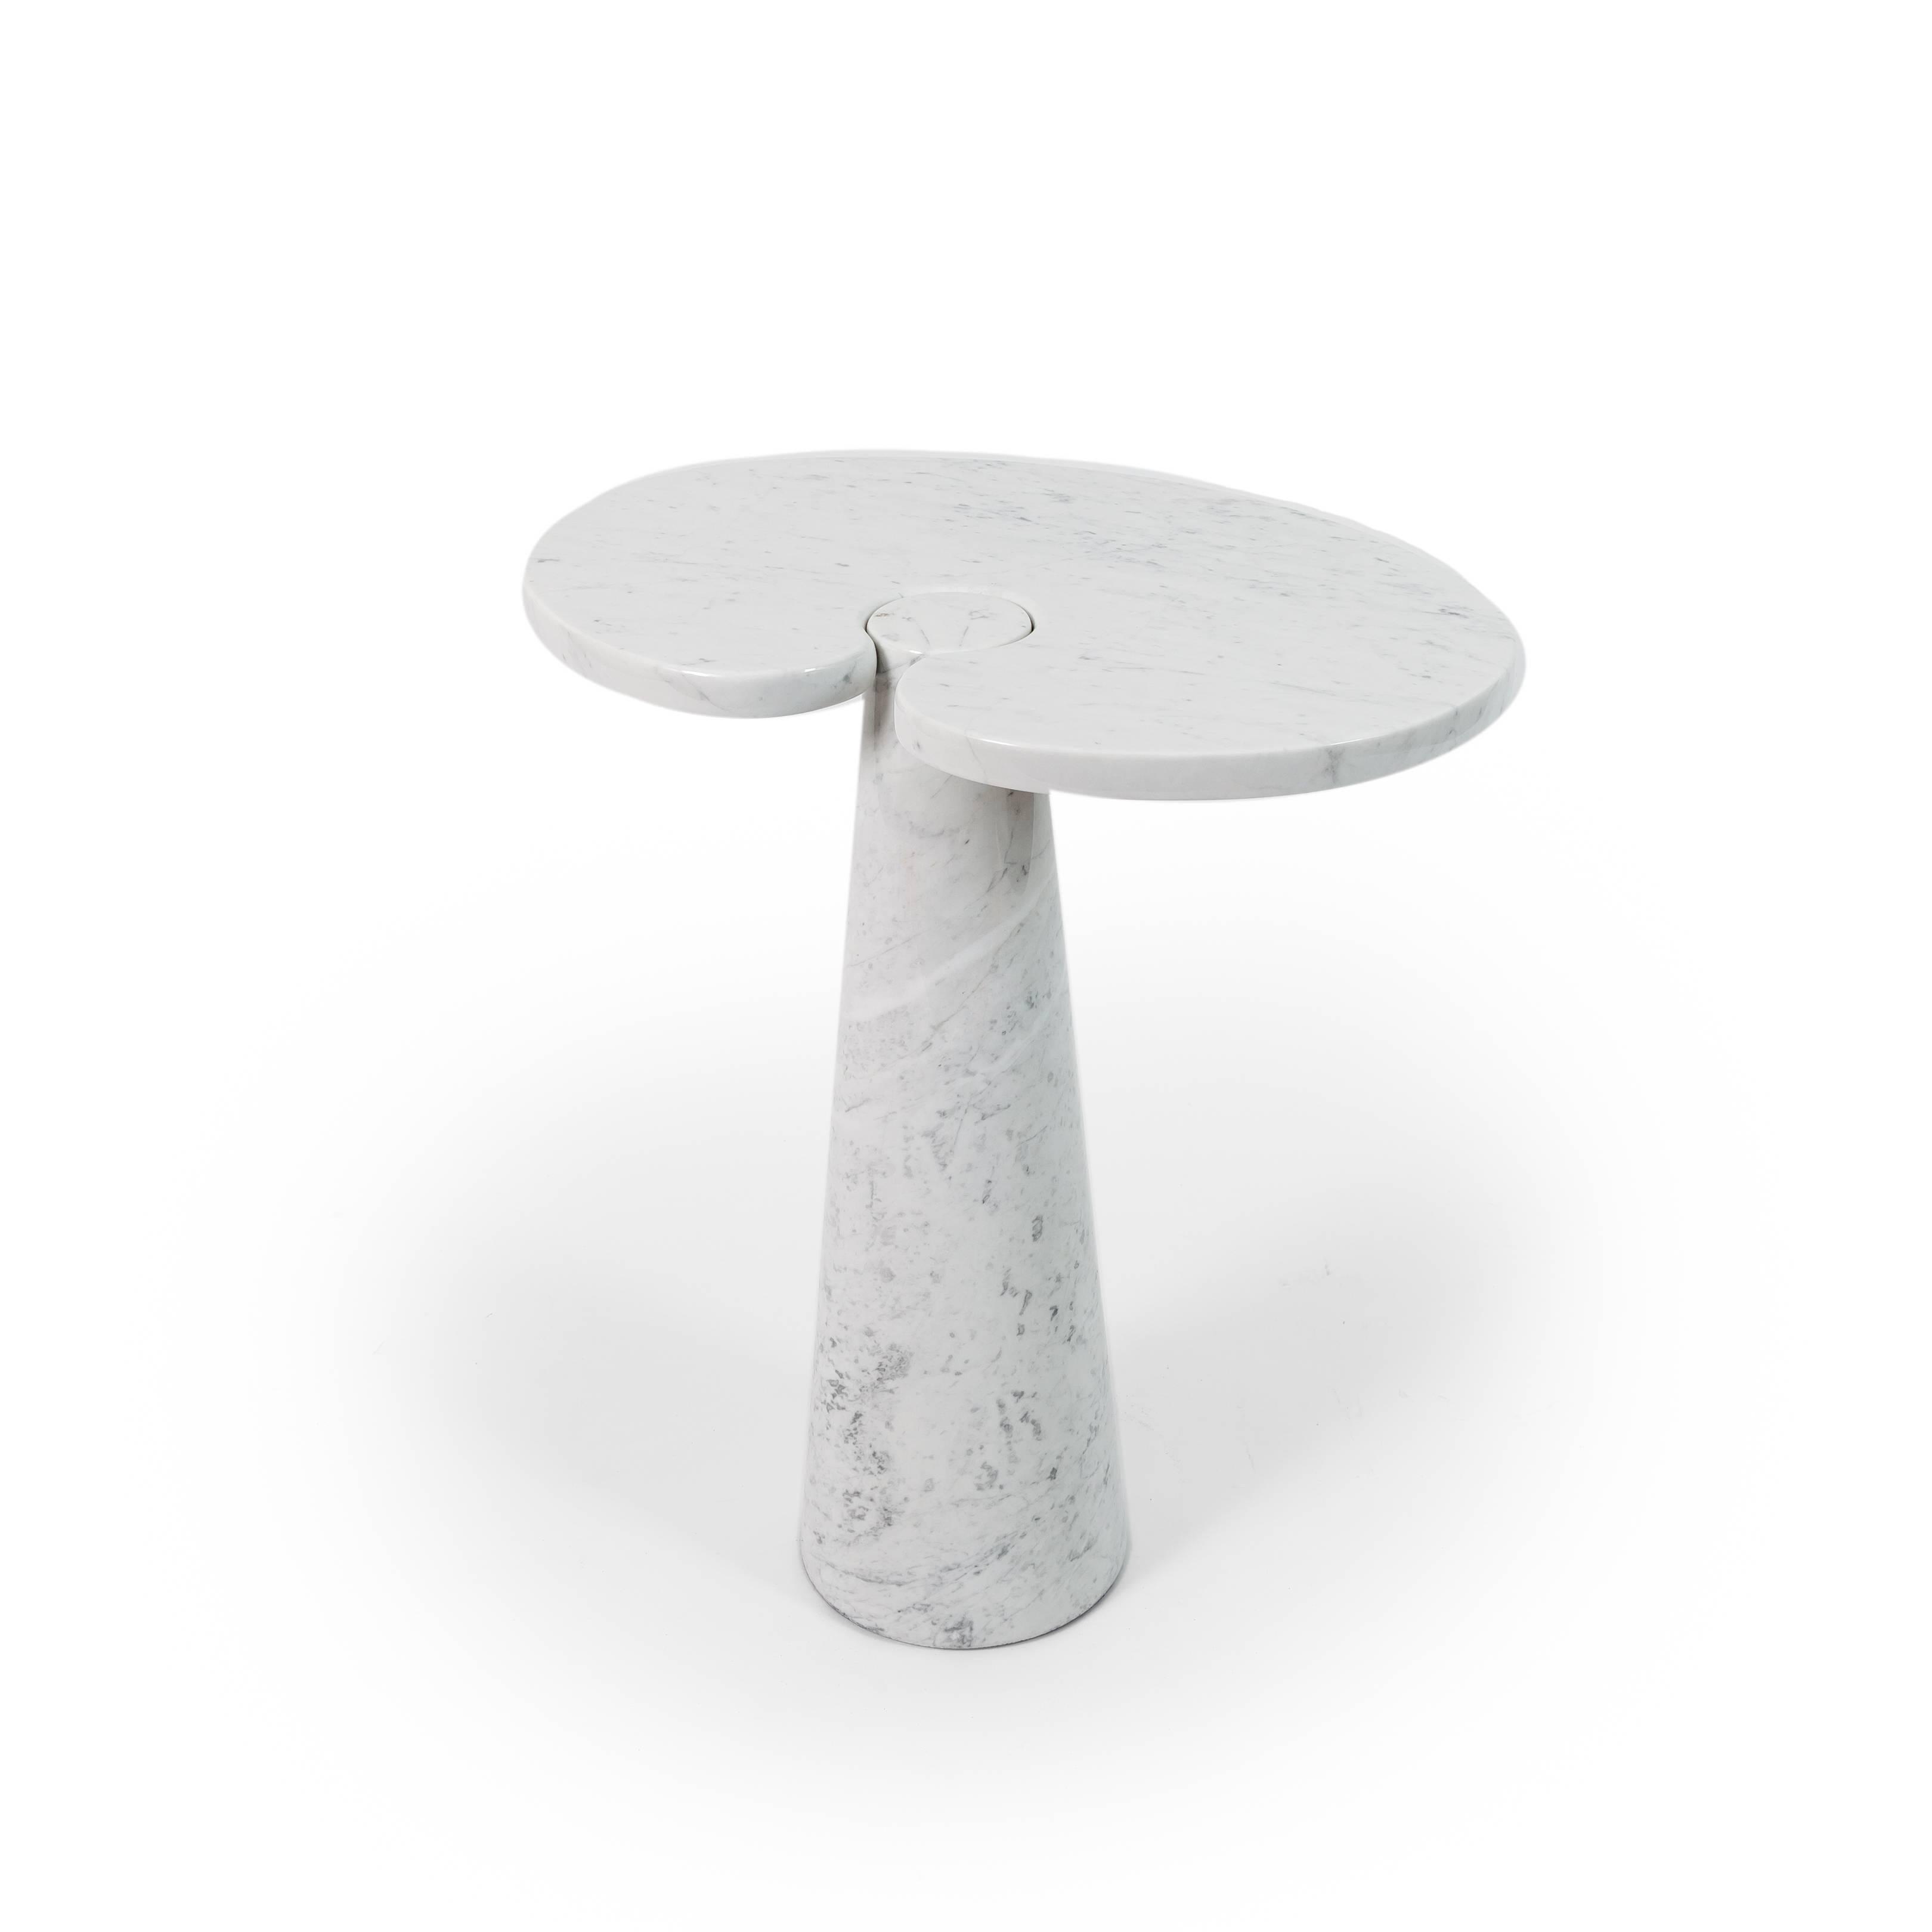 Elegantly organic tall side table or small console with Carrara marble top fitted on conical pedestal base with no joints, and instead, a gravity-based interlocking system which is a Mangiarotti signature design.

Literature:
Beppe Finessi, Su